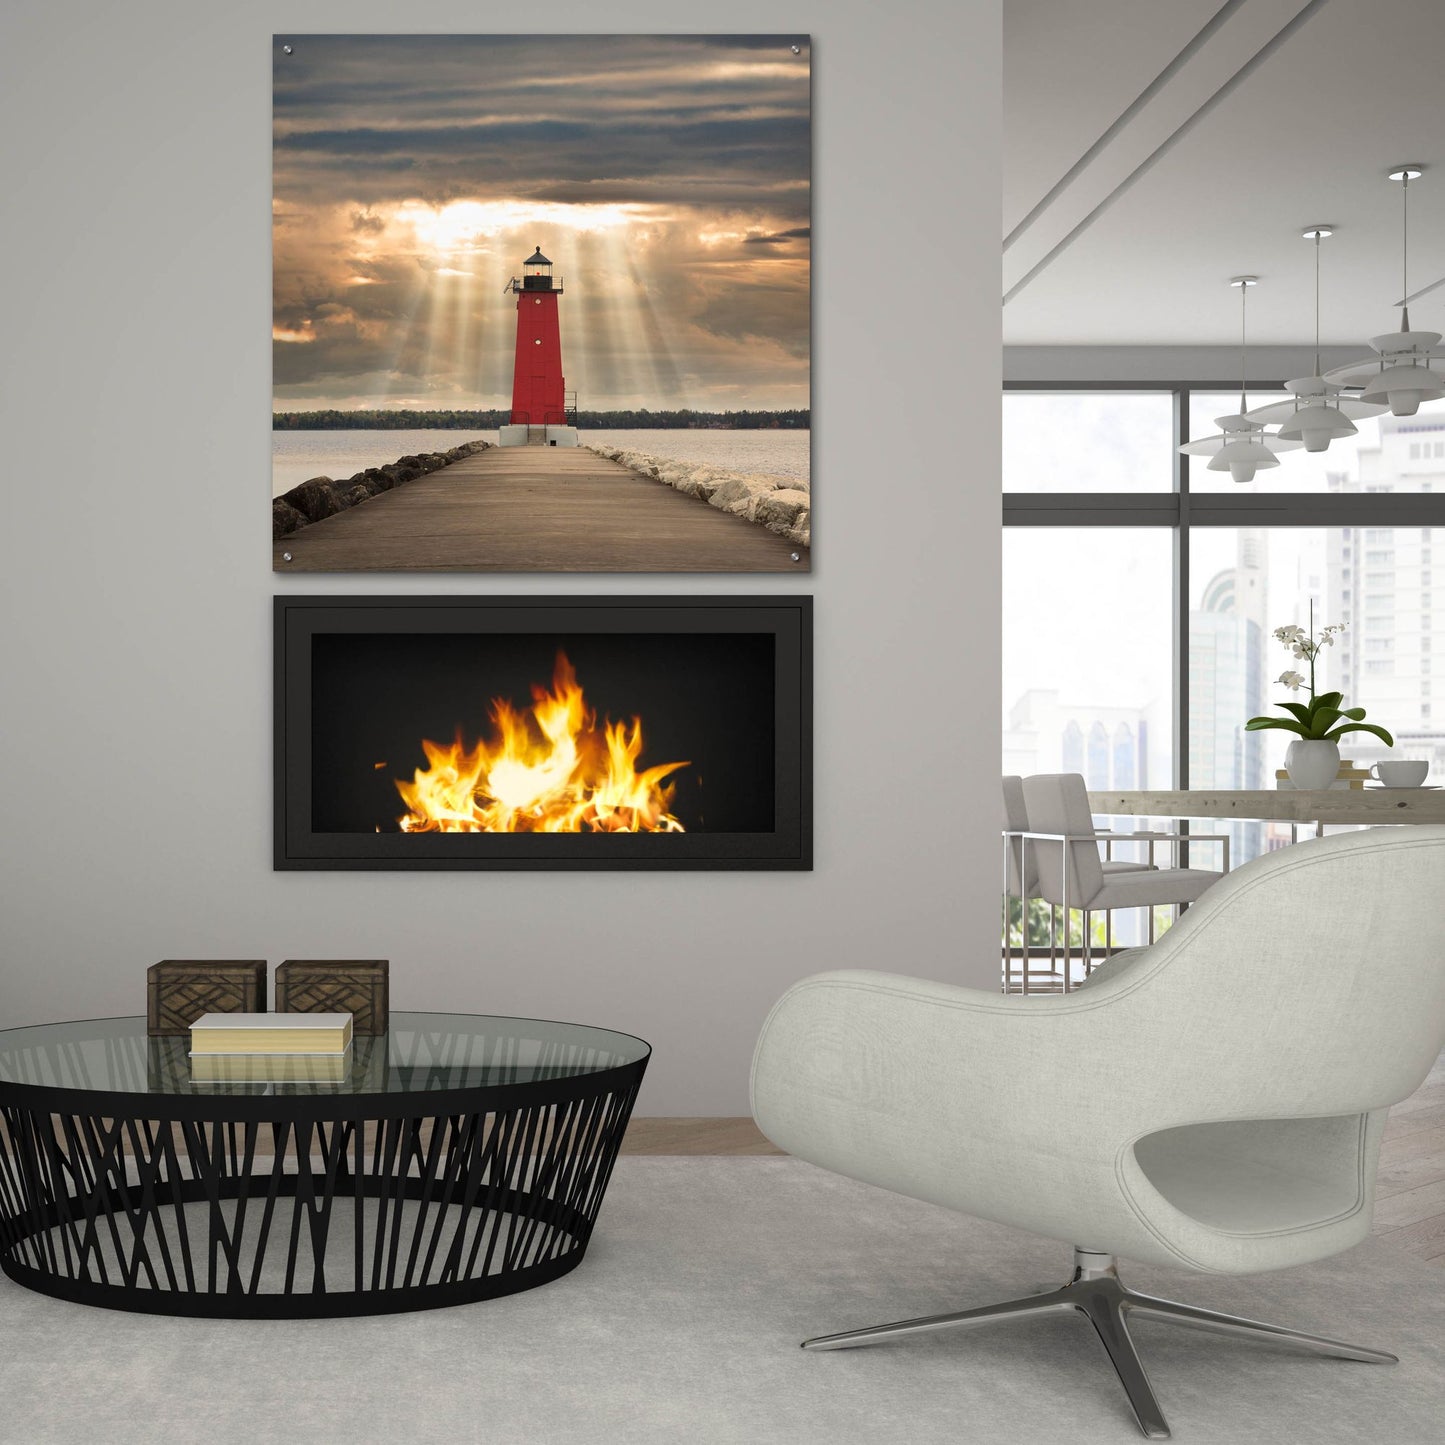 Epic Art 'Manistique Lighthouse & Sunbeams, Michigan 14' by Monte Nagler, Acrylic Glass Wall Art,36x36